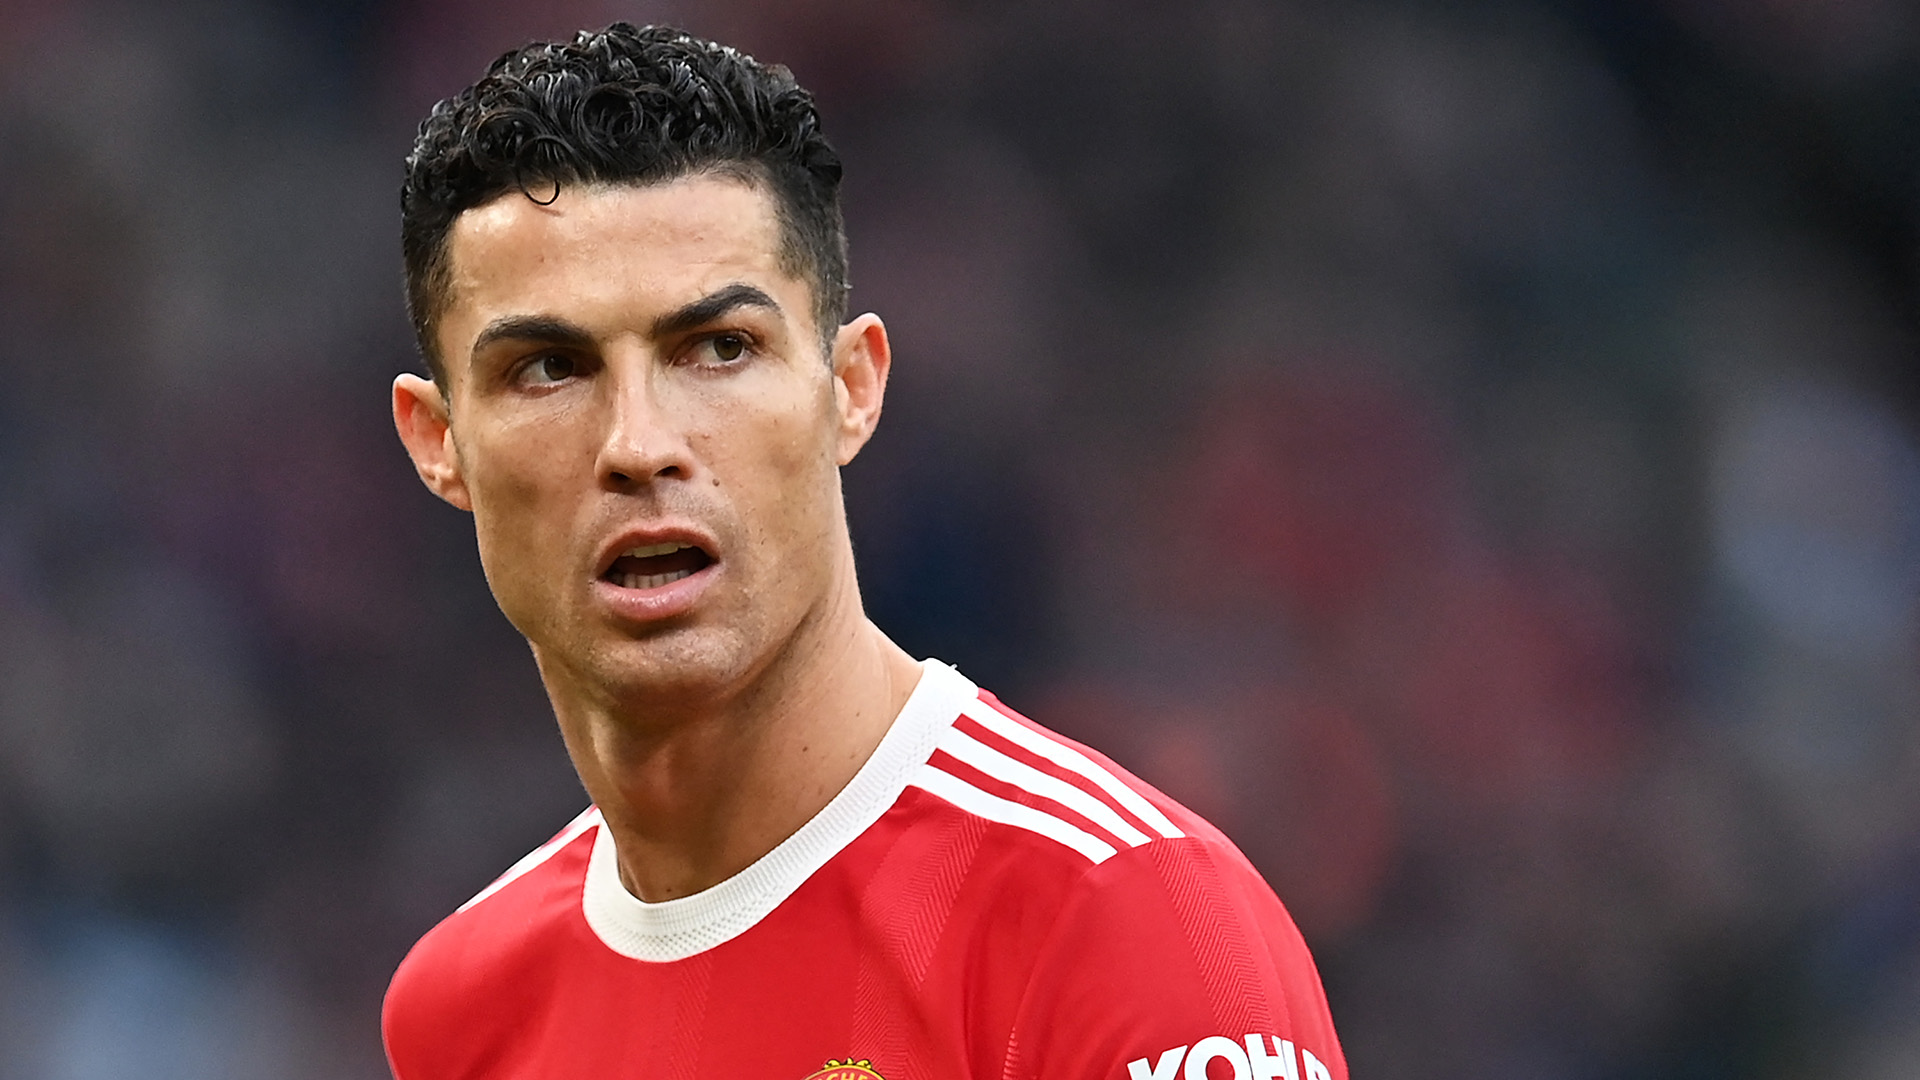 Gary Neville: Cristiano Ronaldo will be looking for a 'cameo role' at a top club - Bóng Đá